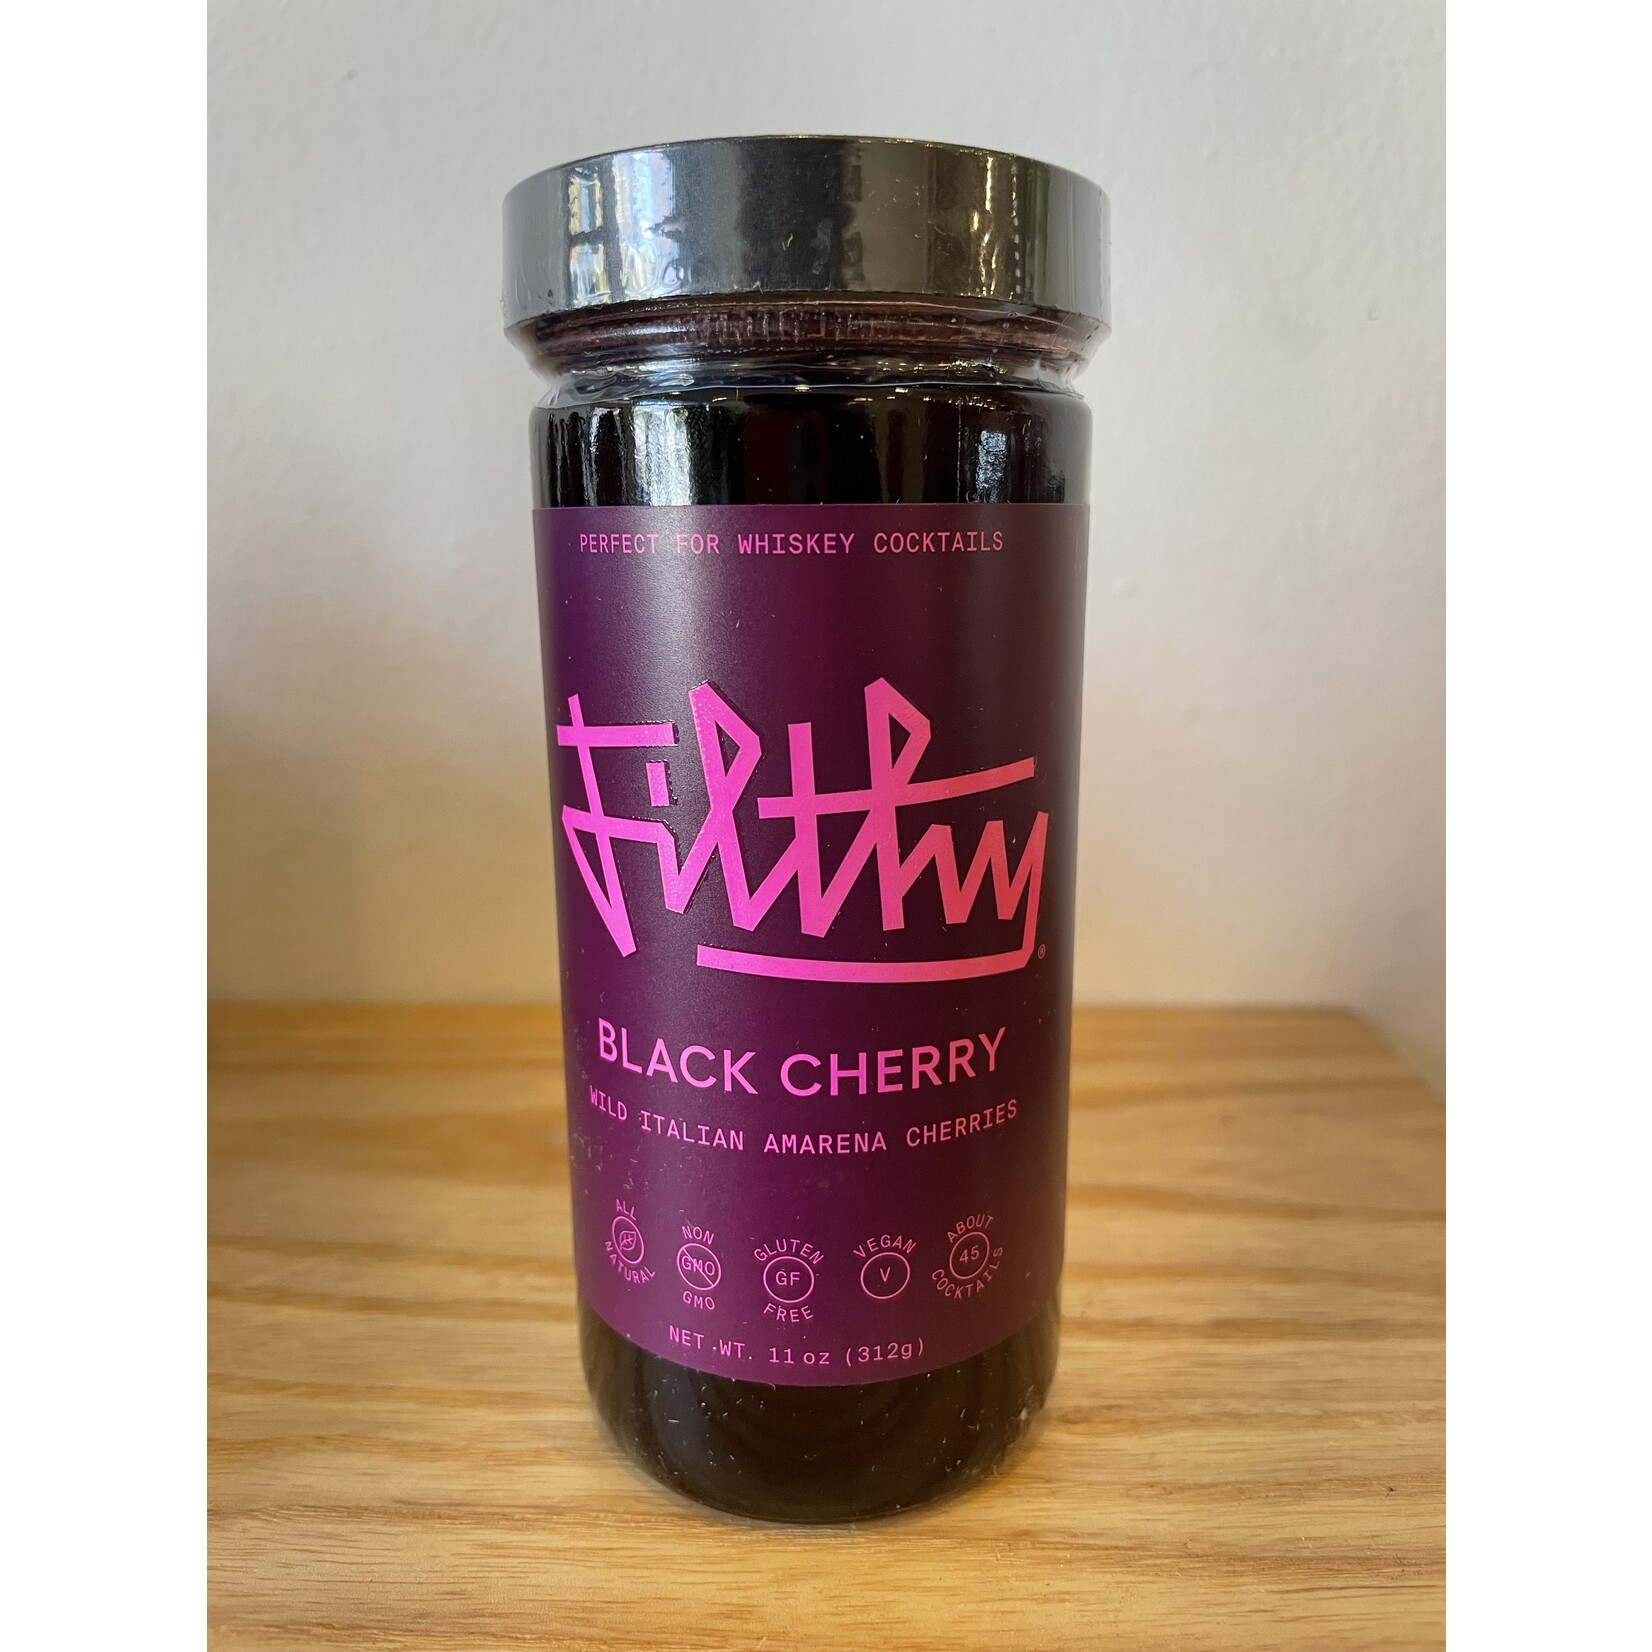 Filthy Filthy Black Cherry